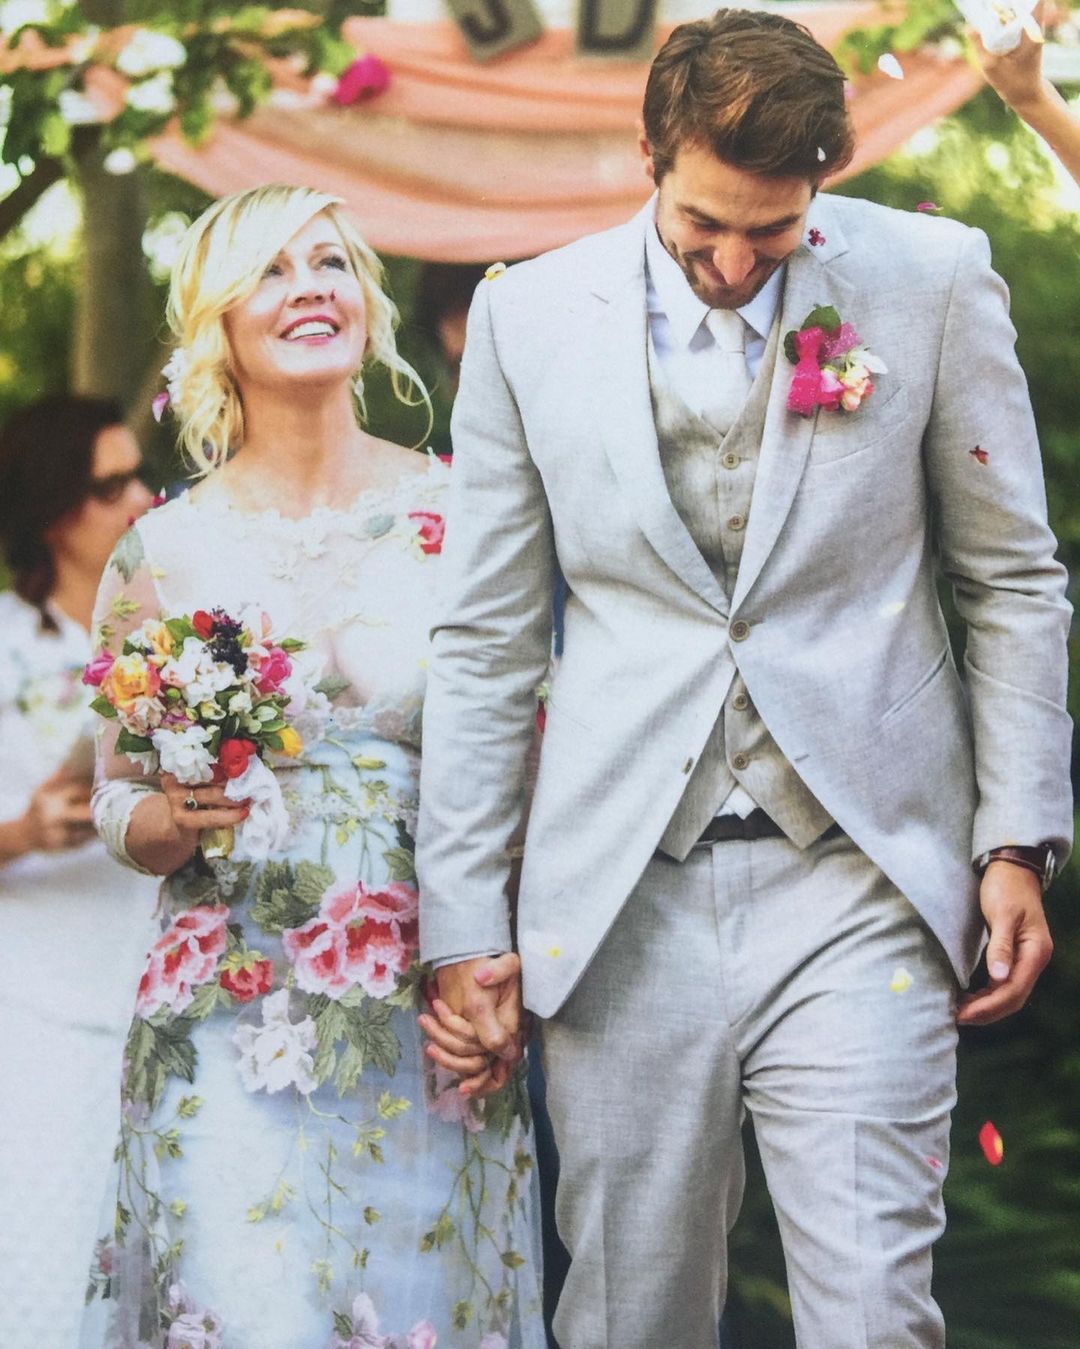 Luca Bella Facinelli's mom with her husband David Abrams on their wedding day.